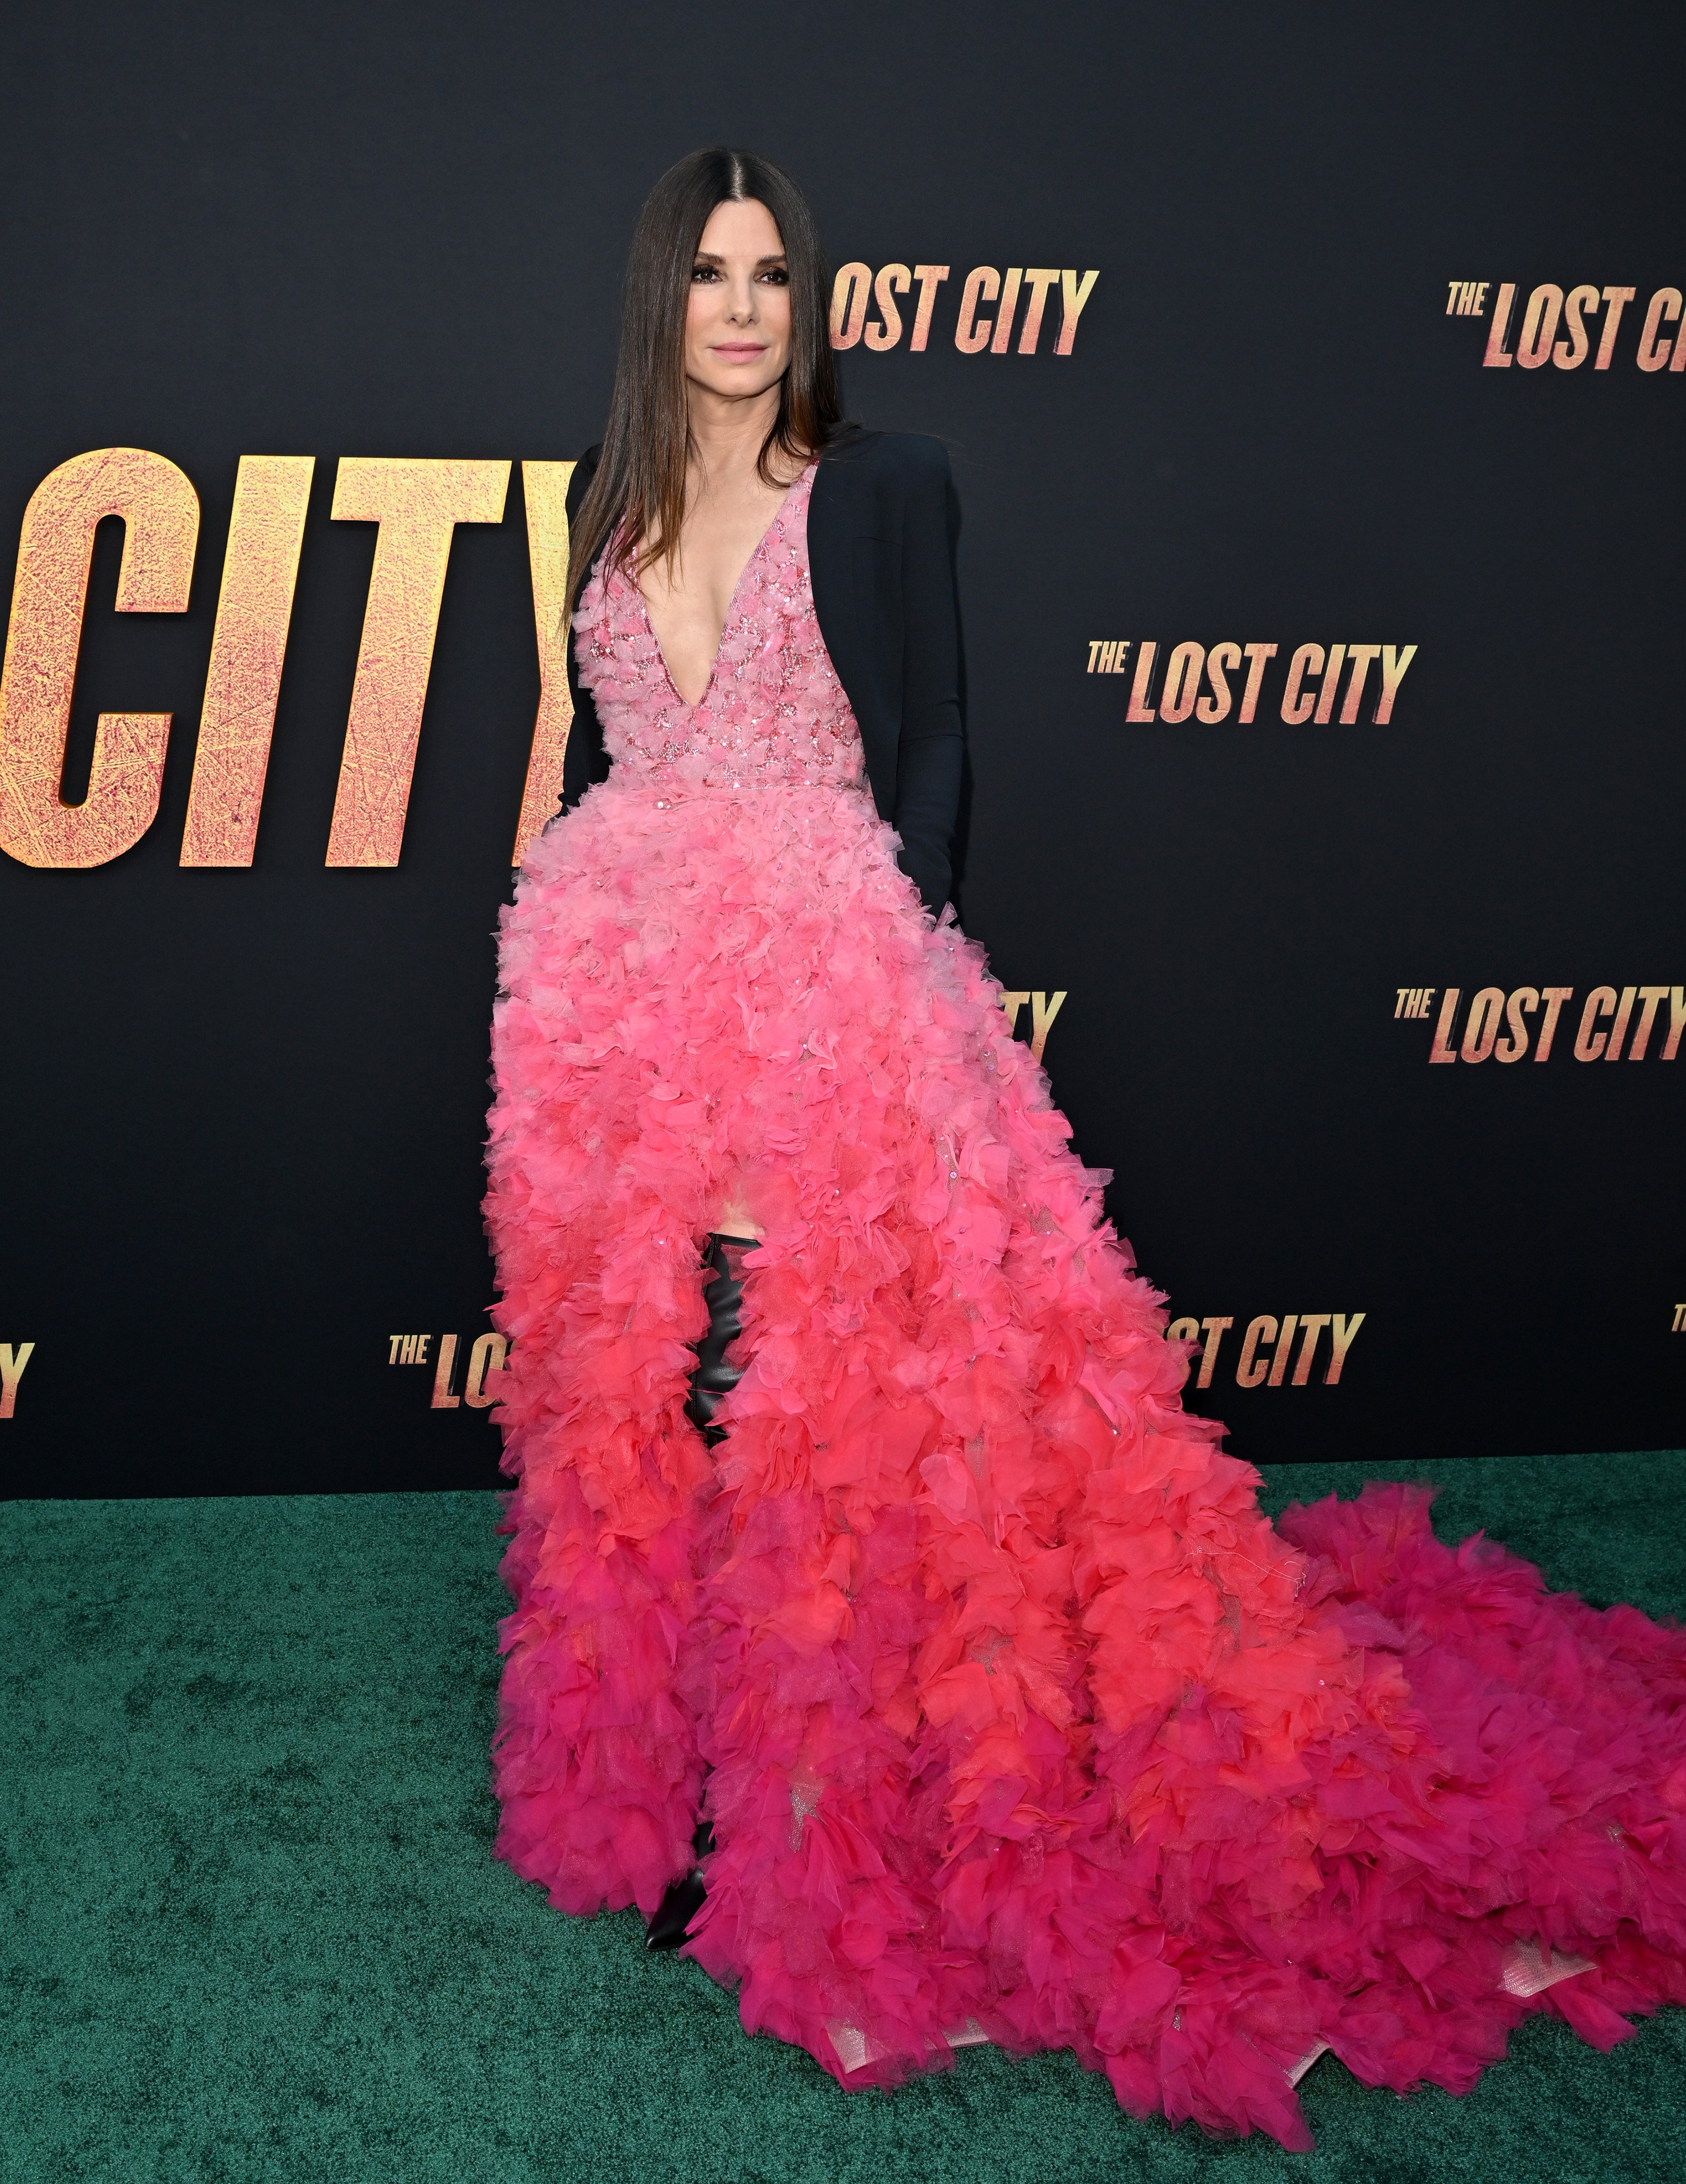 Sandra Bullock at the premiere of "The Lost City" in California on March 21, 2022 | Source: Getty Images 